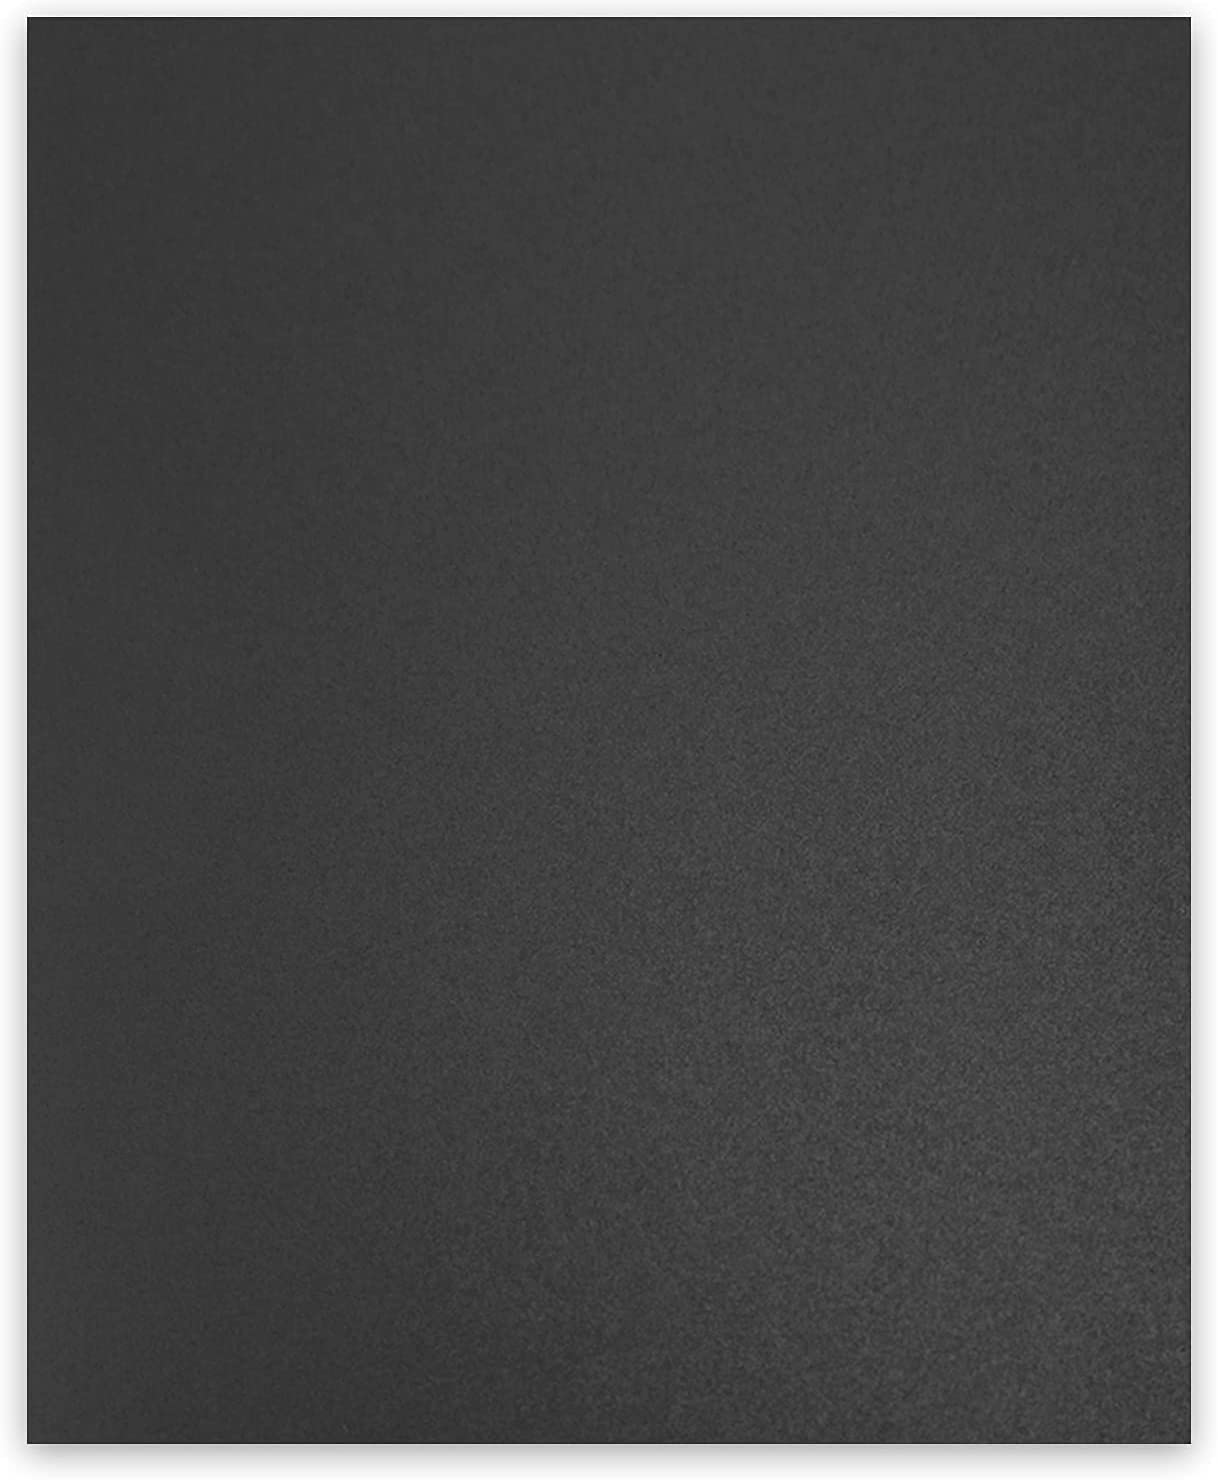 Binding Presentation Covers 12 mil Textured Polycover, Black, 100 Sheets